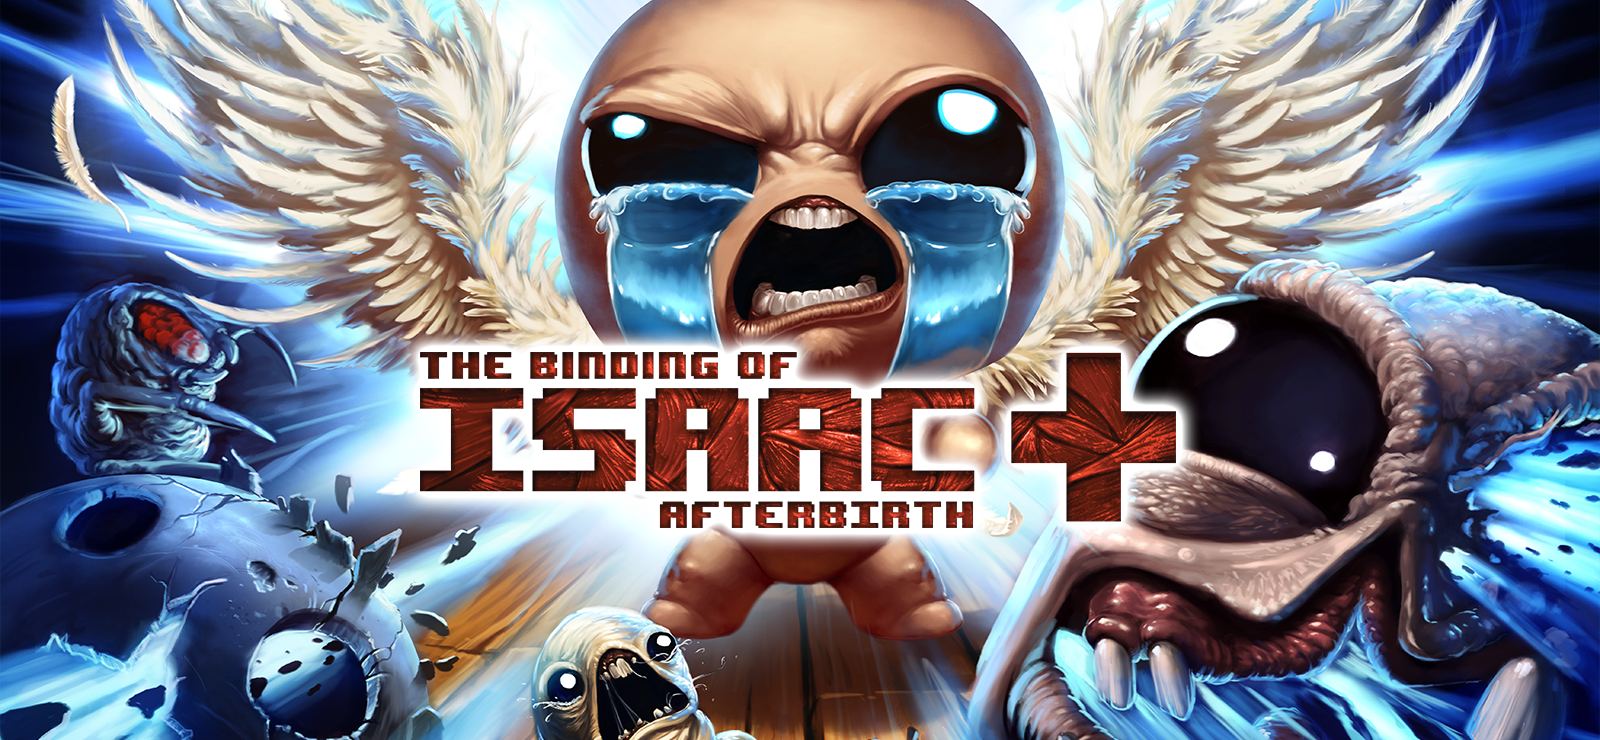 The Binding Of Isaac: Afterbirth+